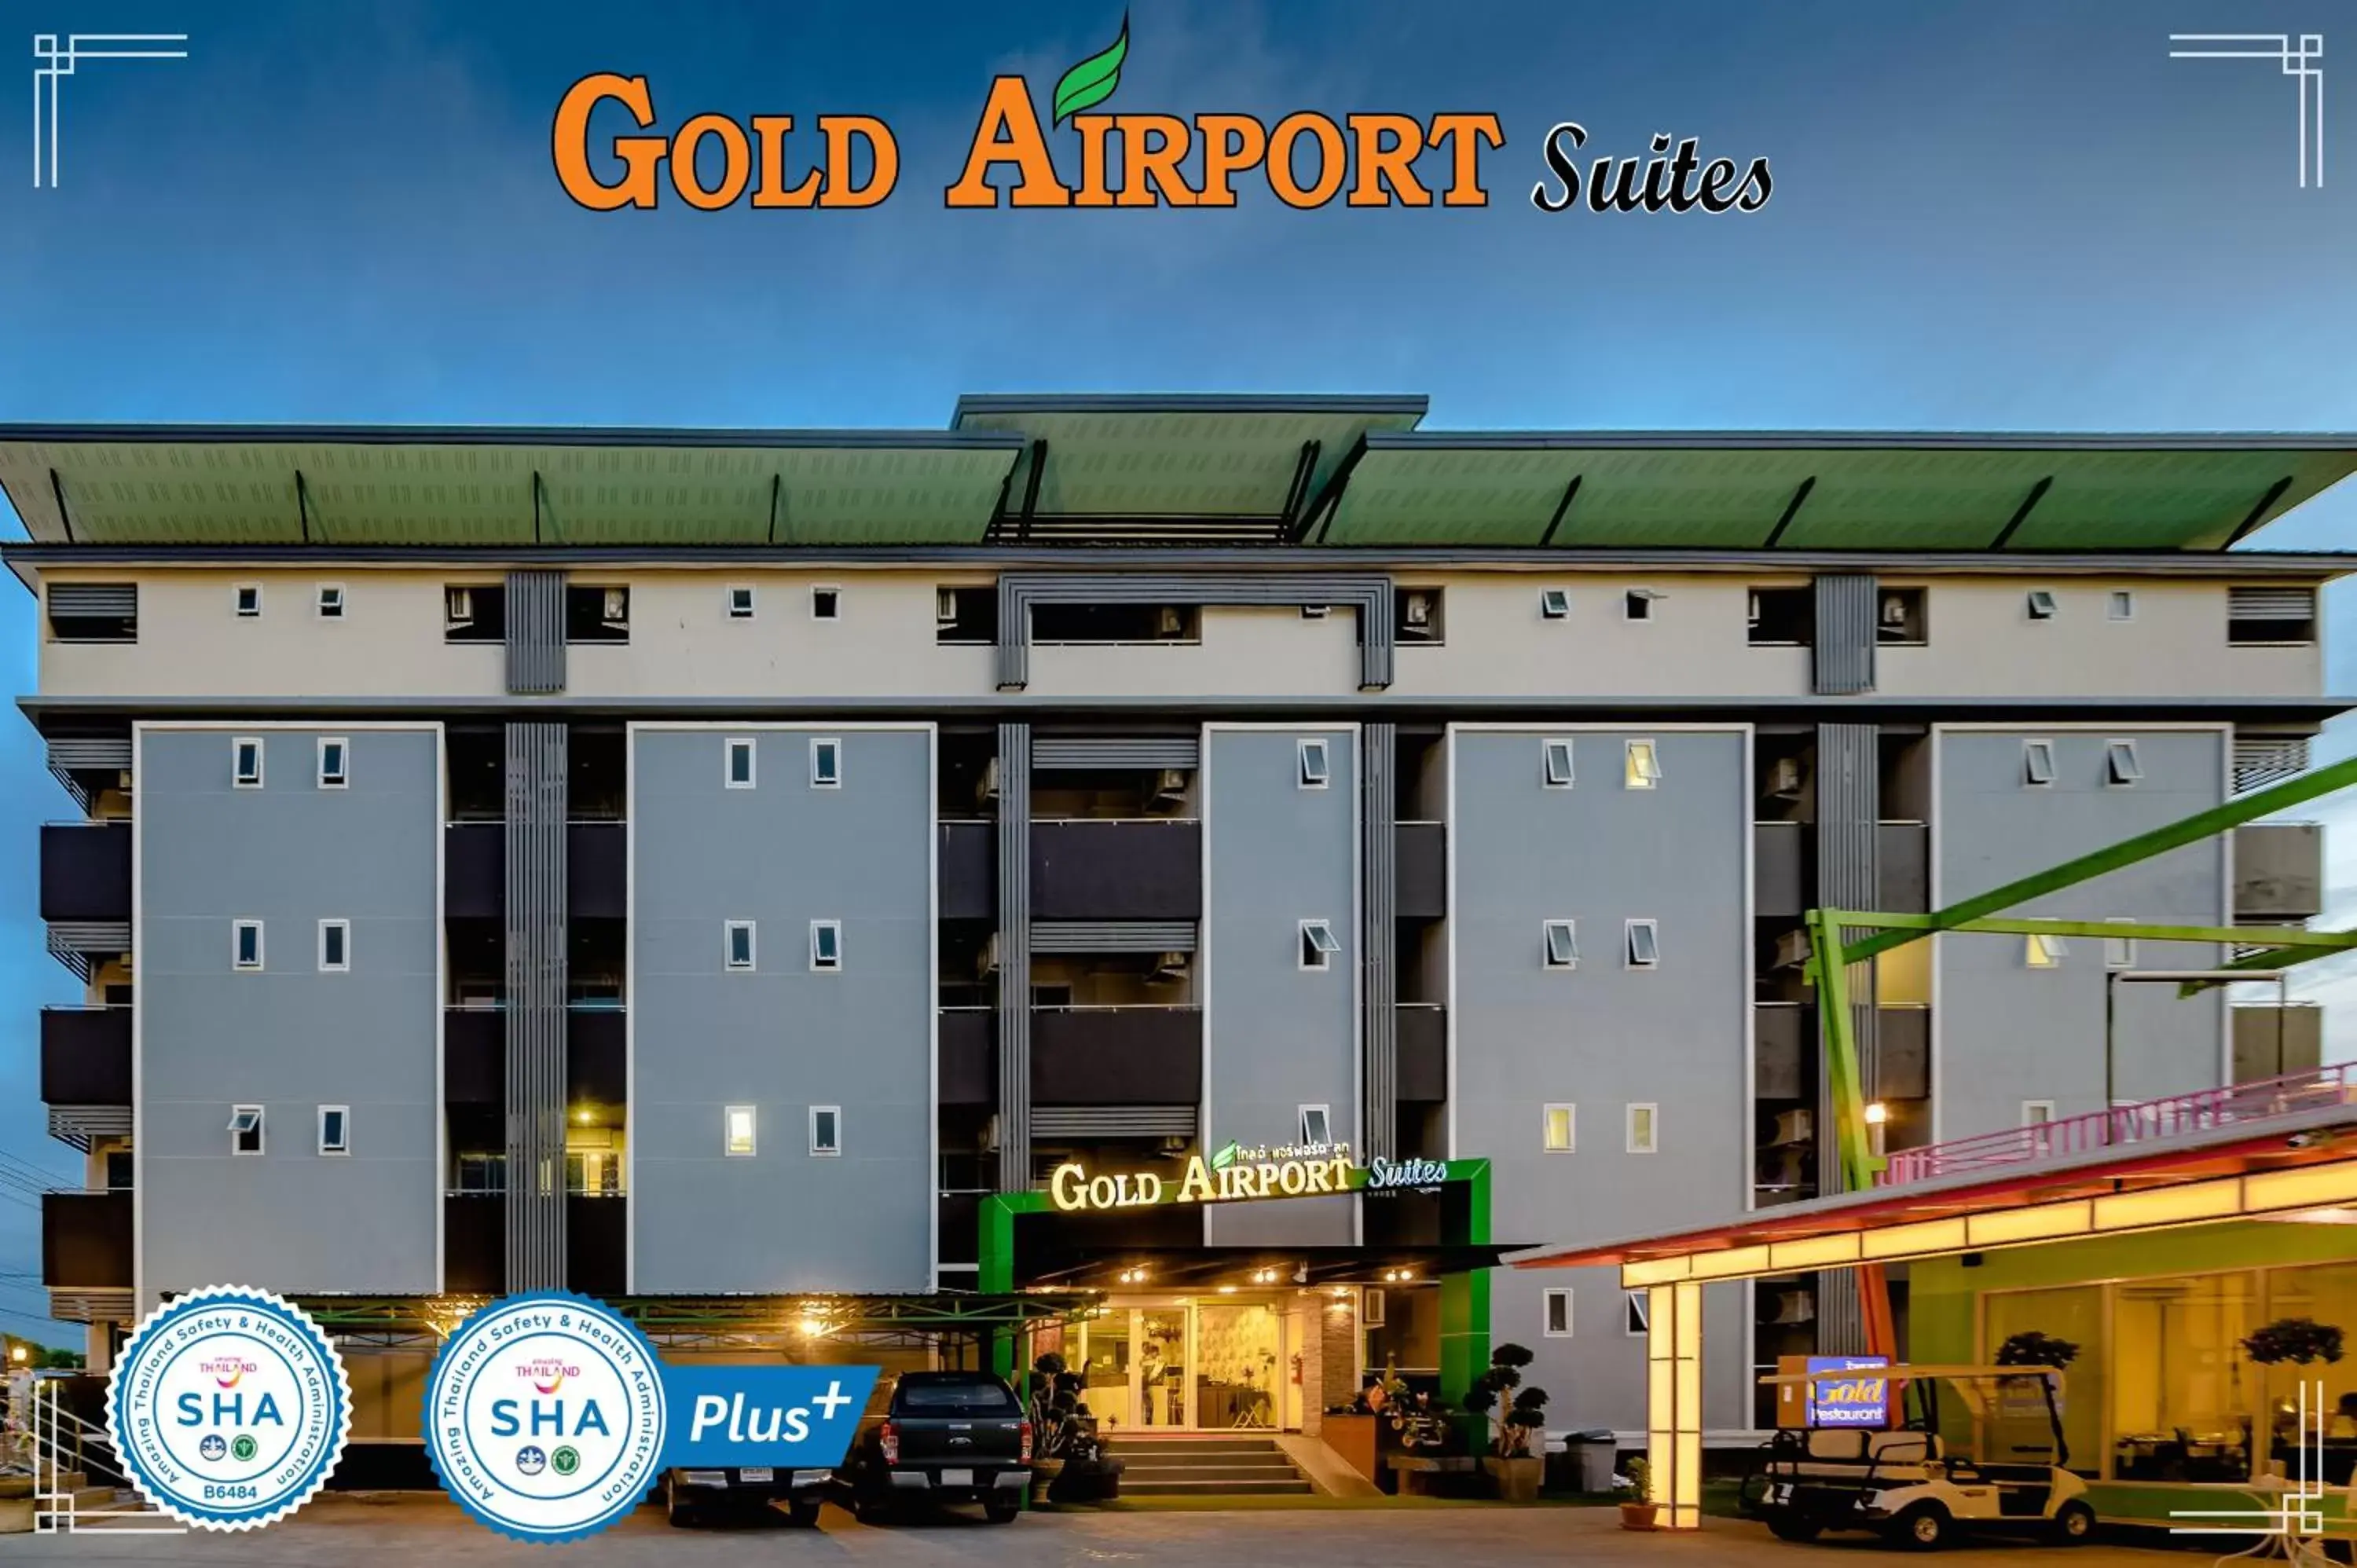 Property Building in Gold Airport Suites